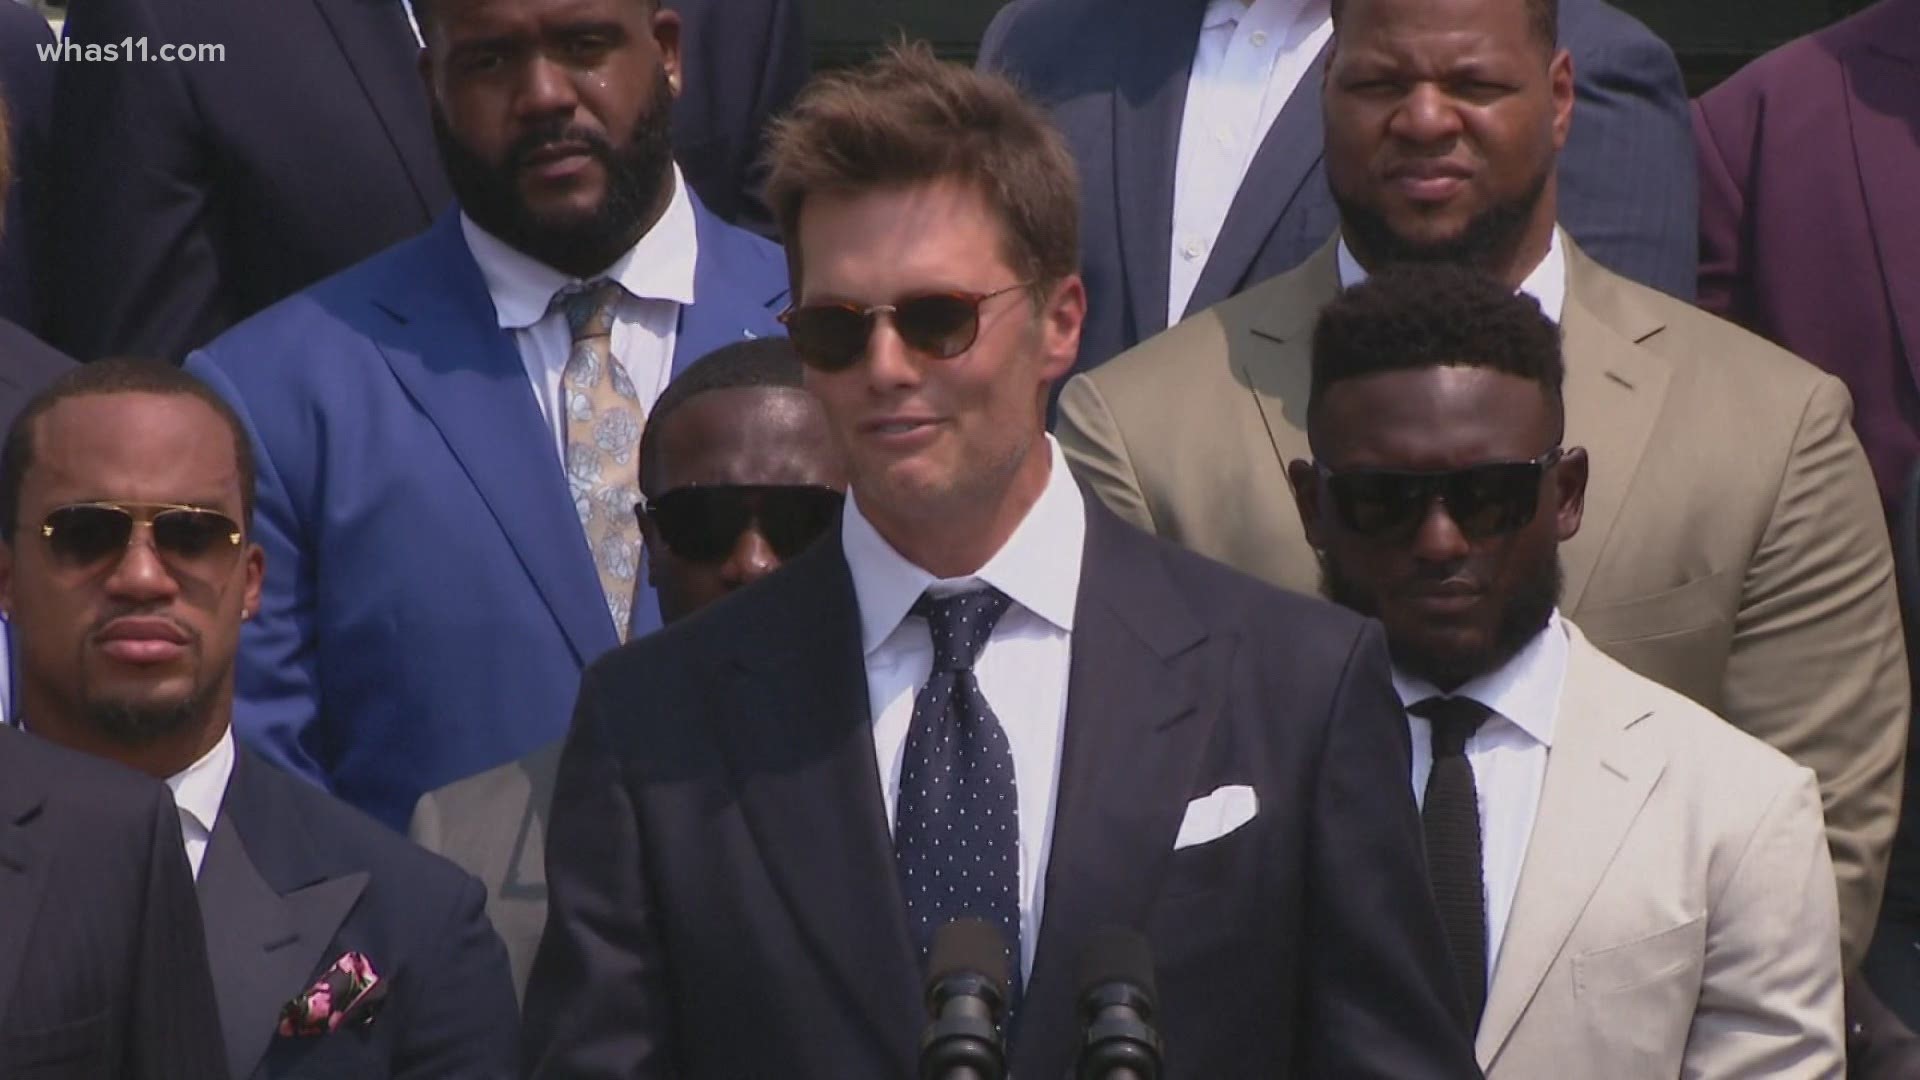 Tom Brady and the Tampa Bay Bucs made Super Bowl White House appearance Tuesday.